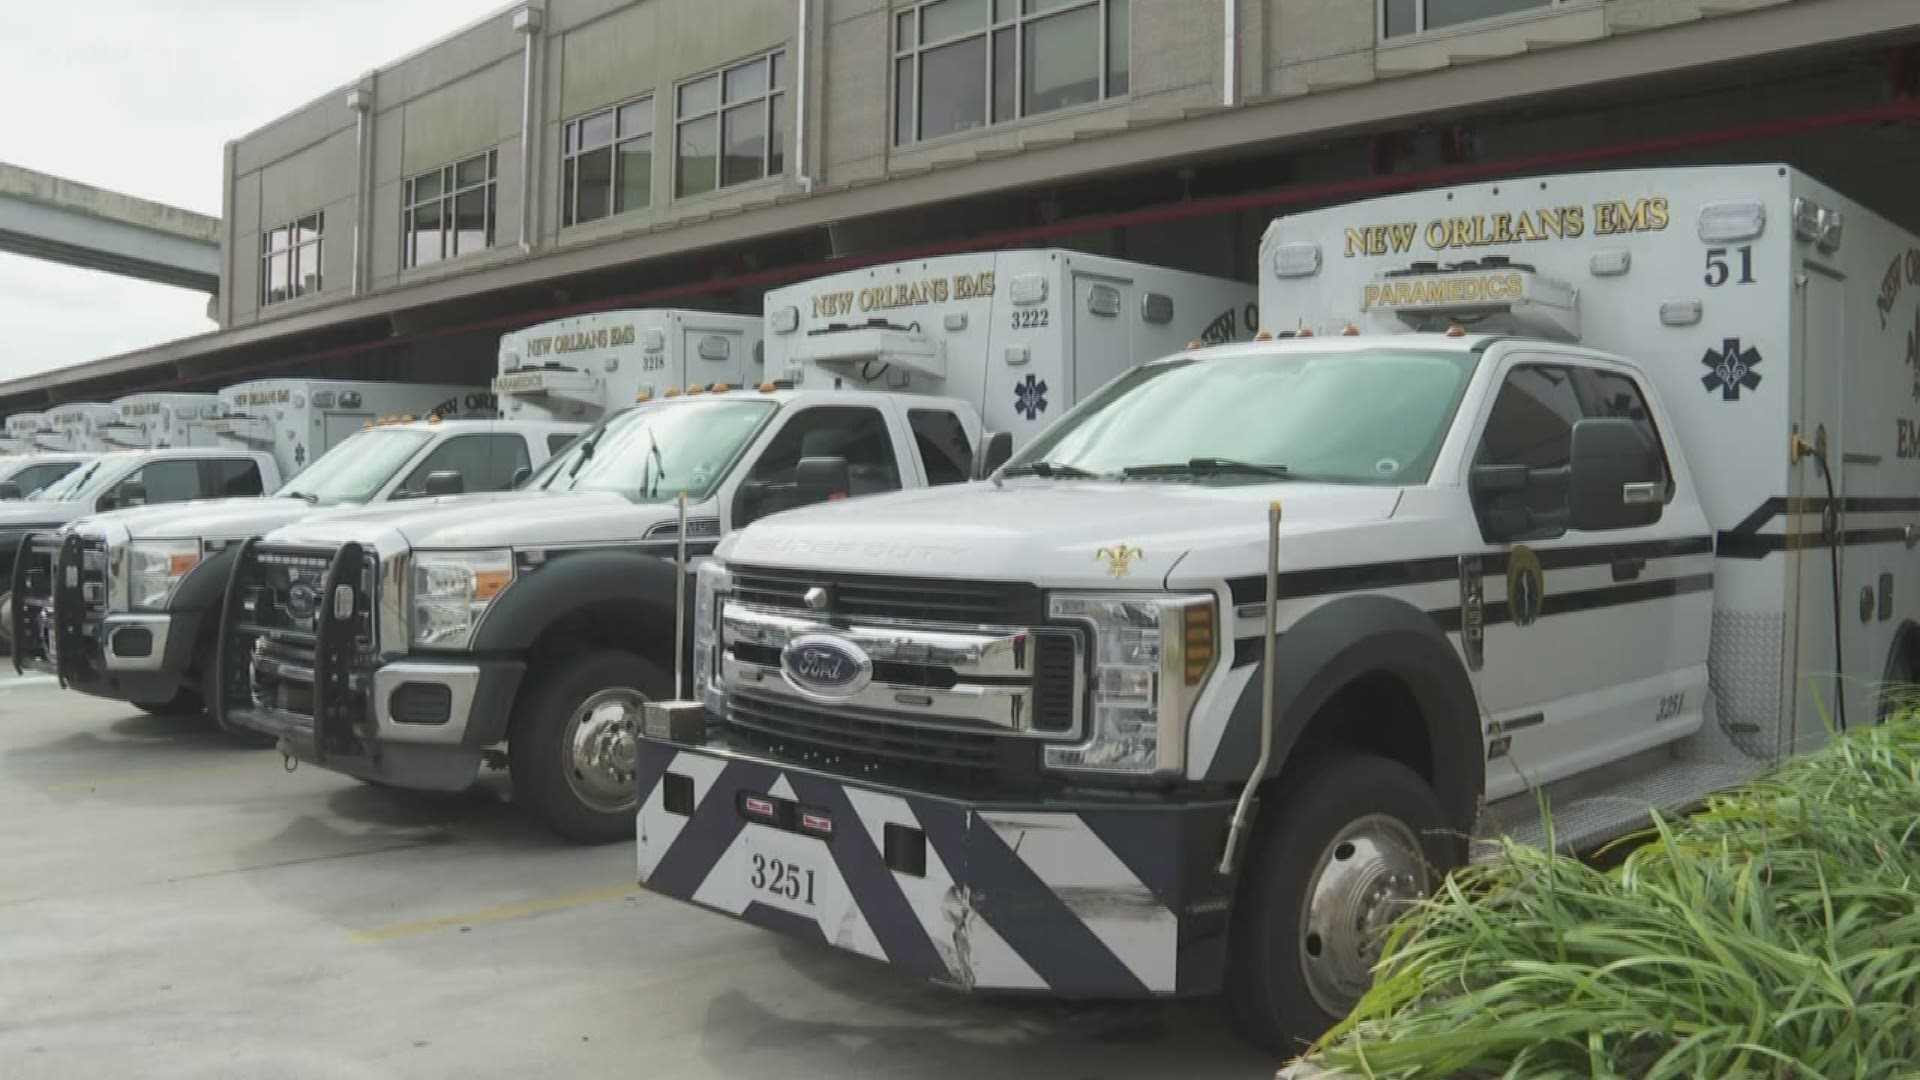 The new virus is impacting New Orleans' first responders, with NOFD, NOPD and EMS personnel either infected or in quarantine after coming into contact with COVID-19.